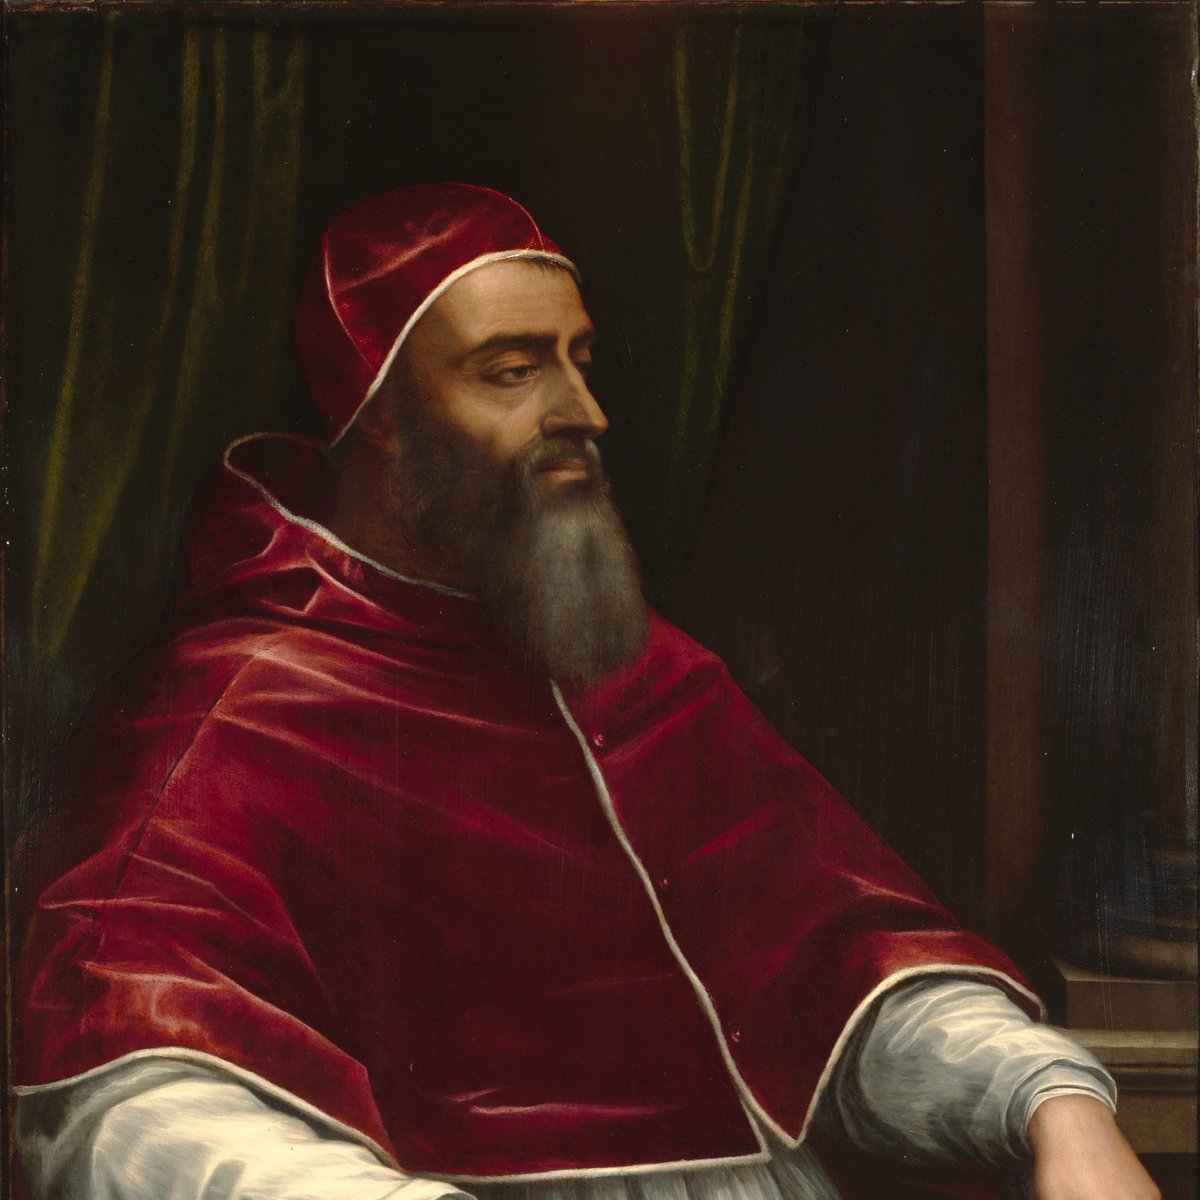 In the early 1530s, he asked Pope Clement VII’s permission to divorce Catherine and marry Anne. The Pope refused. But Henry did it anyway. In the process, he severed ties with Rome, made himself the head of a new, English Church, and executed his best friend, Thomas More. [LP]